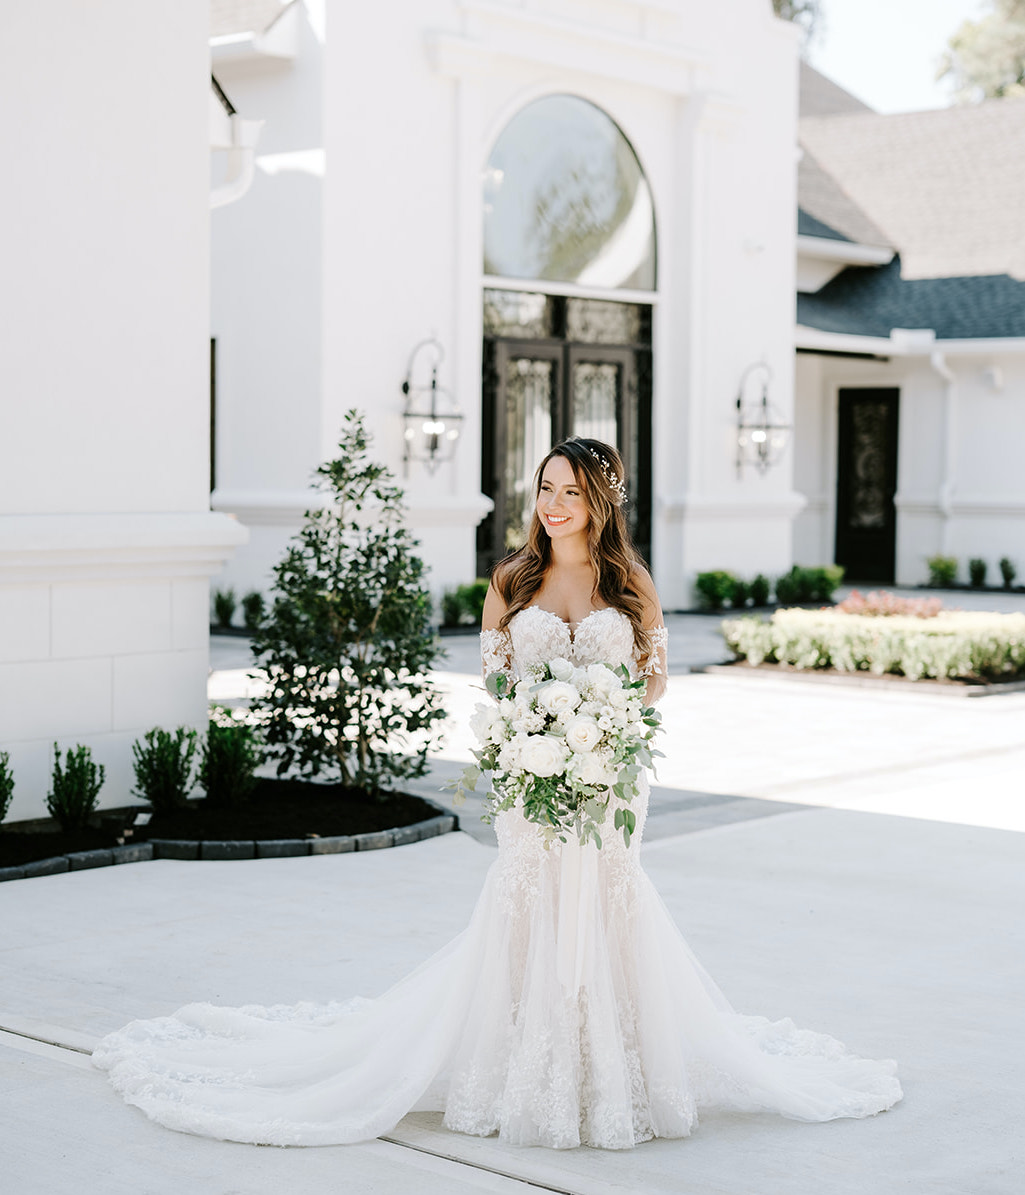 The bride stands outside The Peach Orchard holding her bridal bouquet, which is full of lush greenery and ivory flowers.